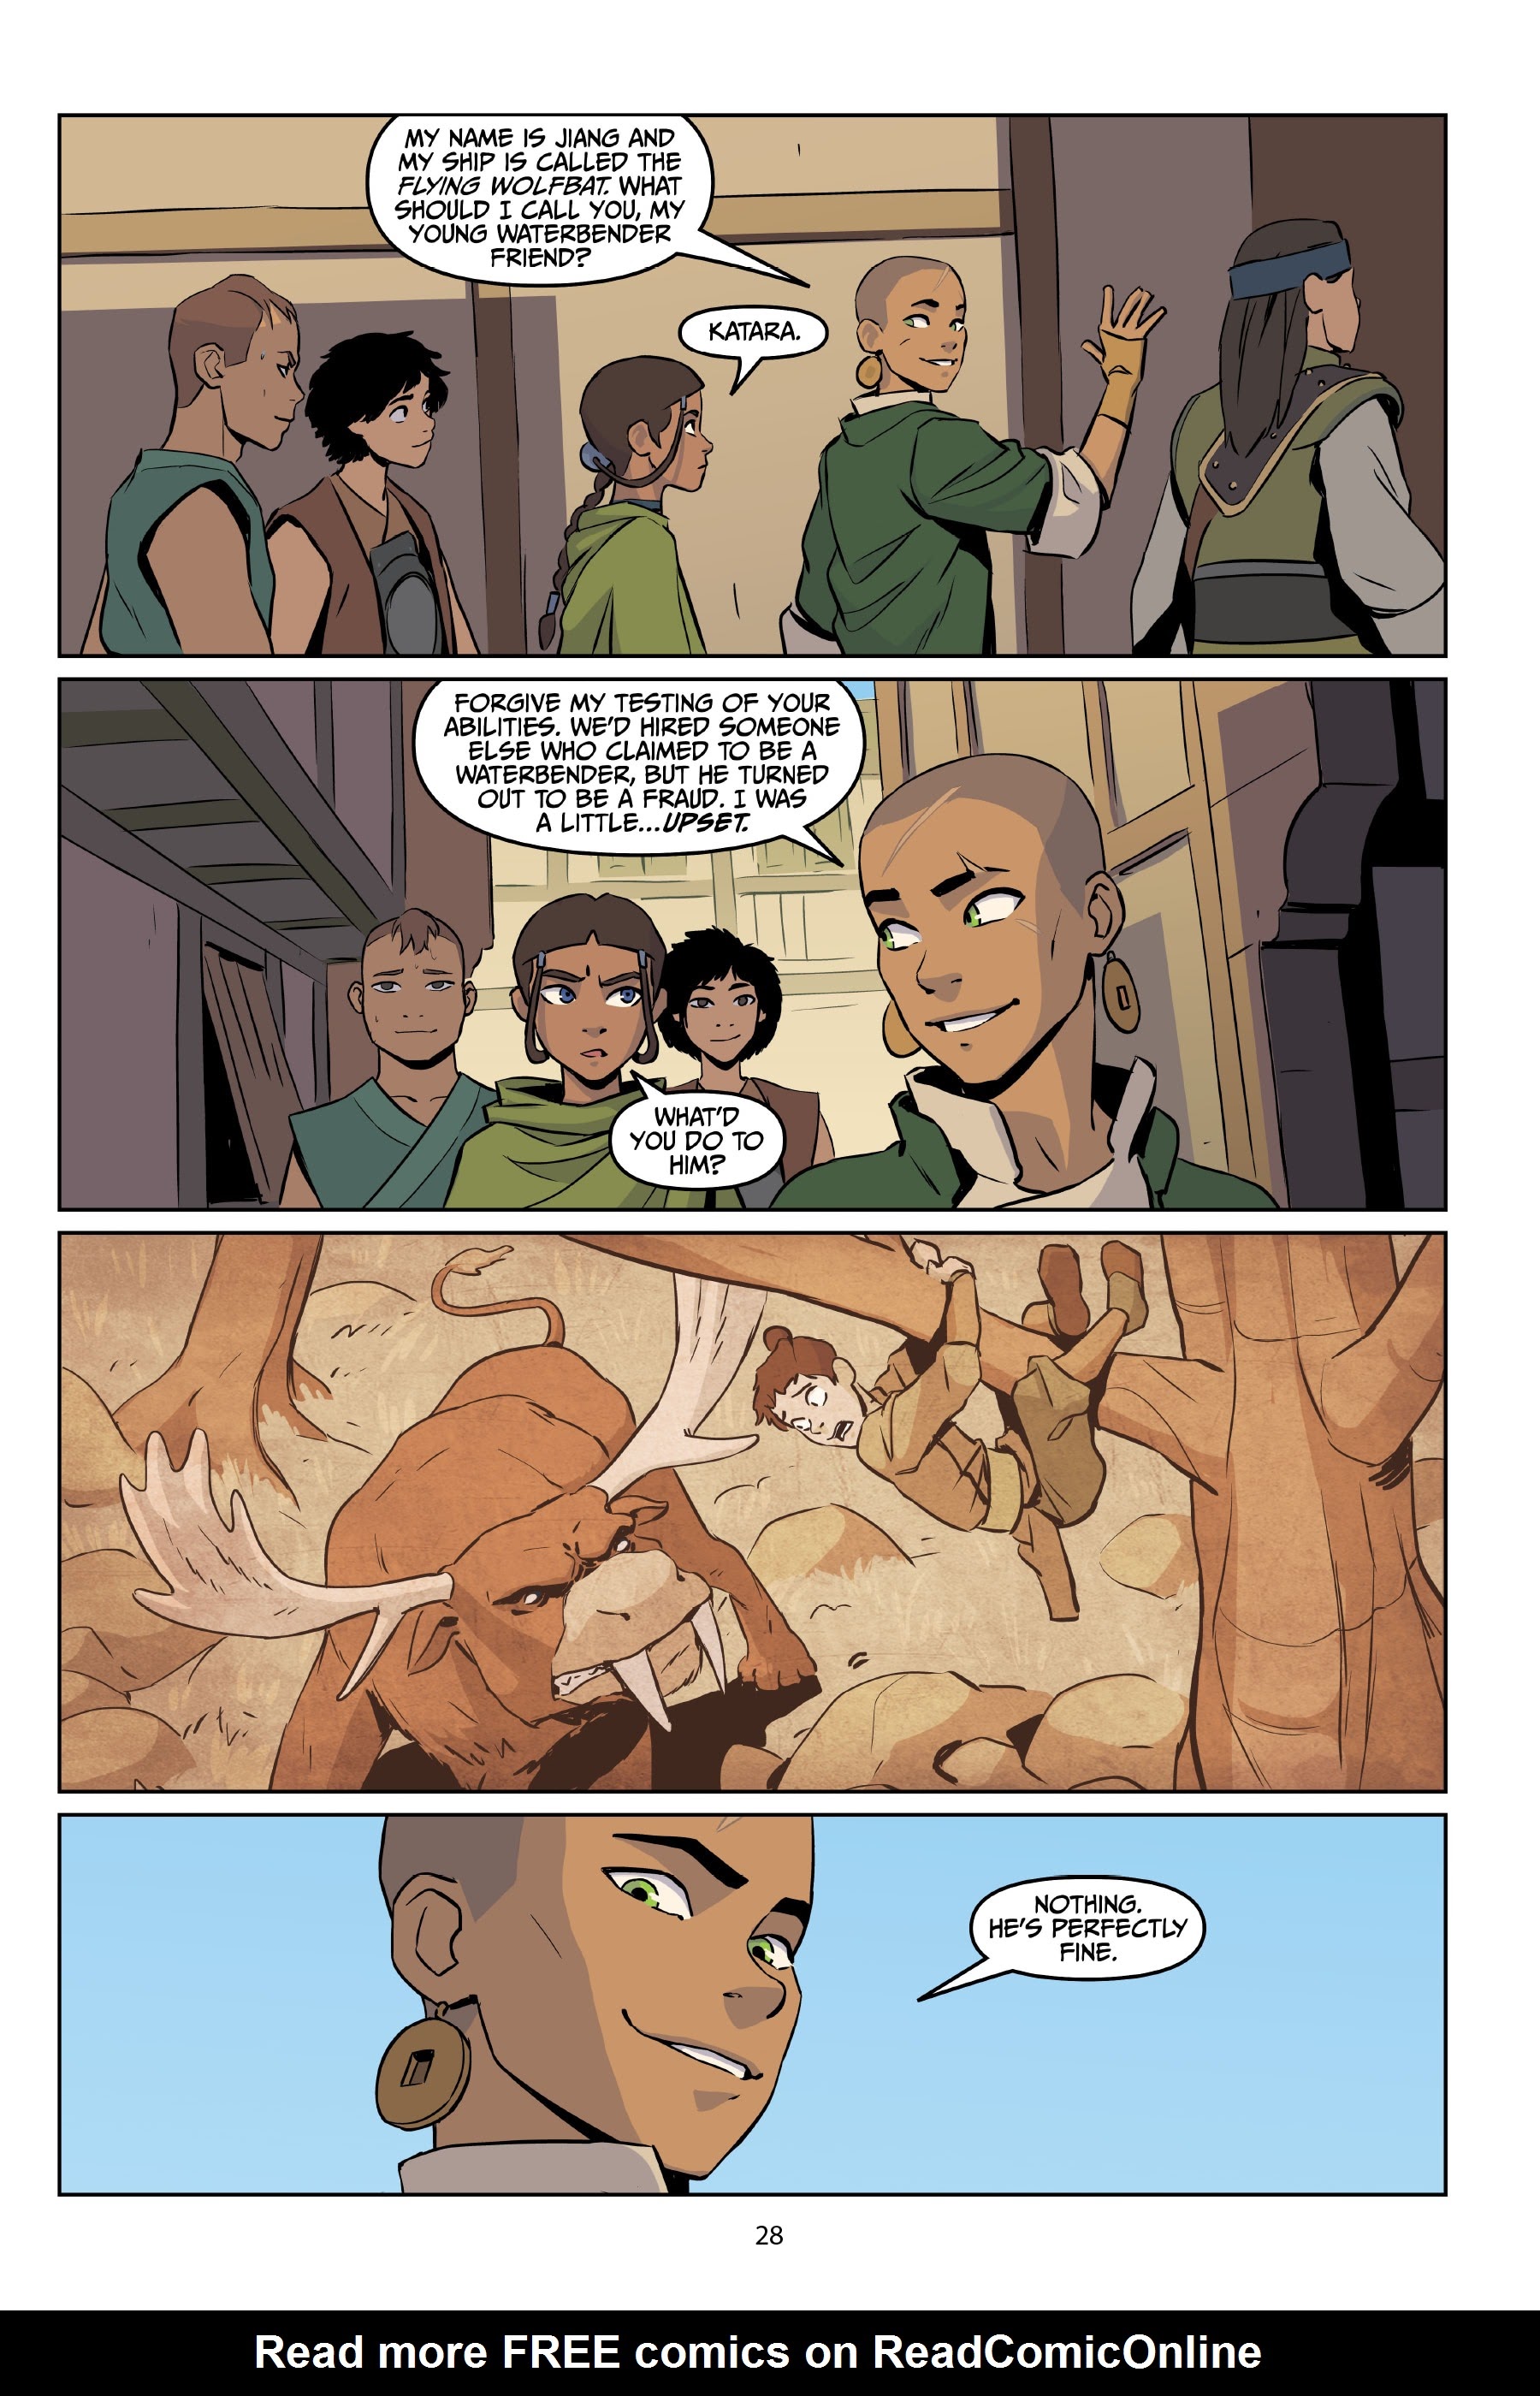 Read online Avatar: The Last Airbender—Katara and the Pirate's Silver comic -  Issue # TPB - 29